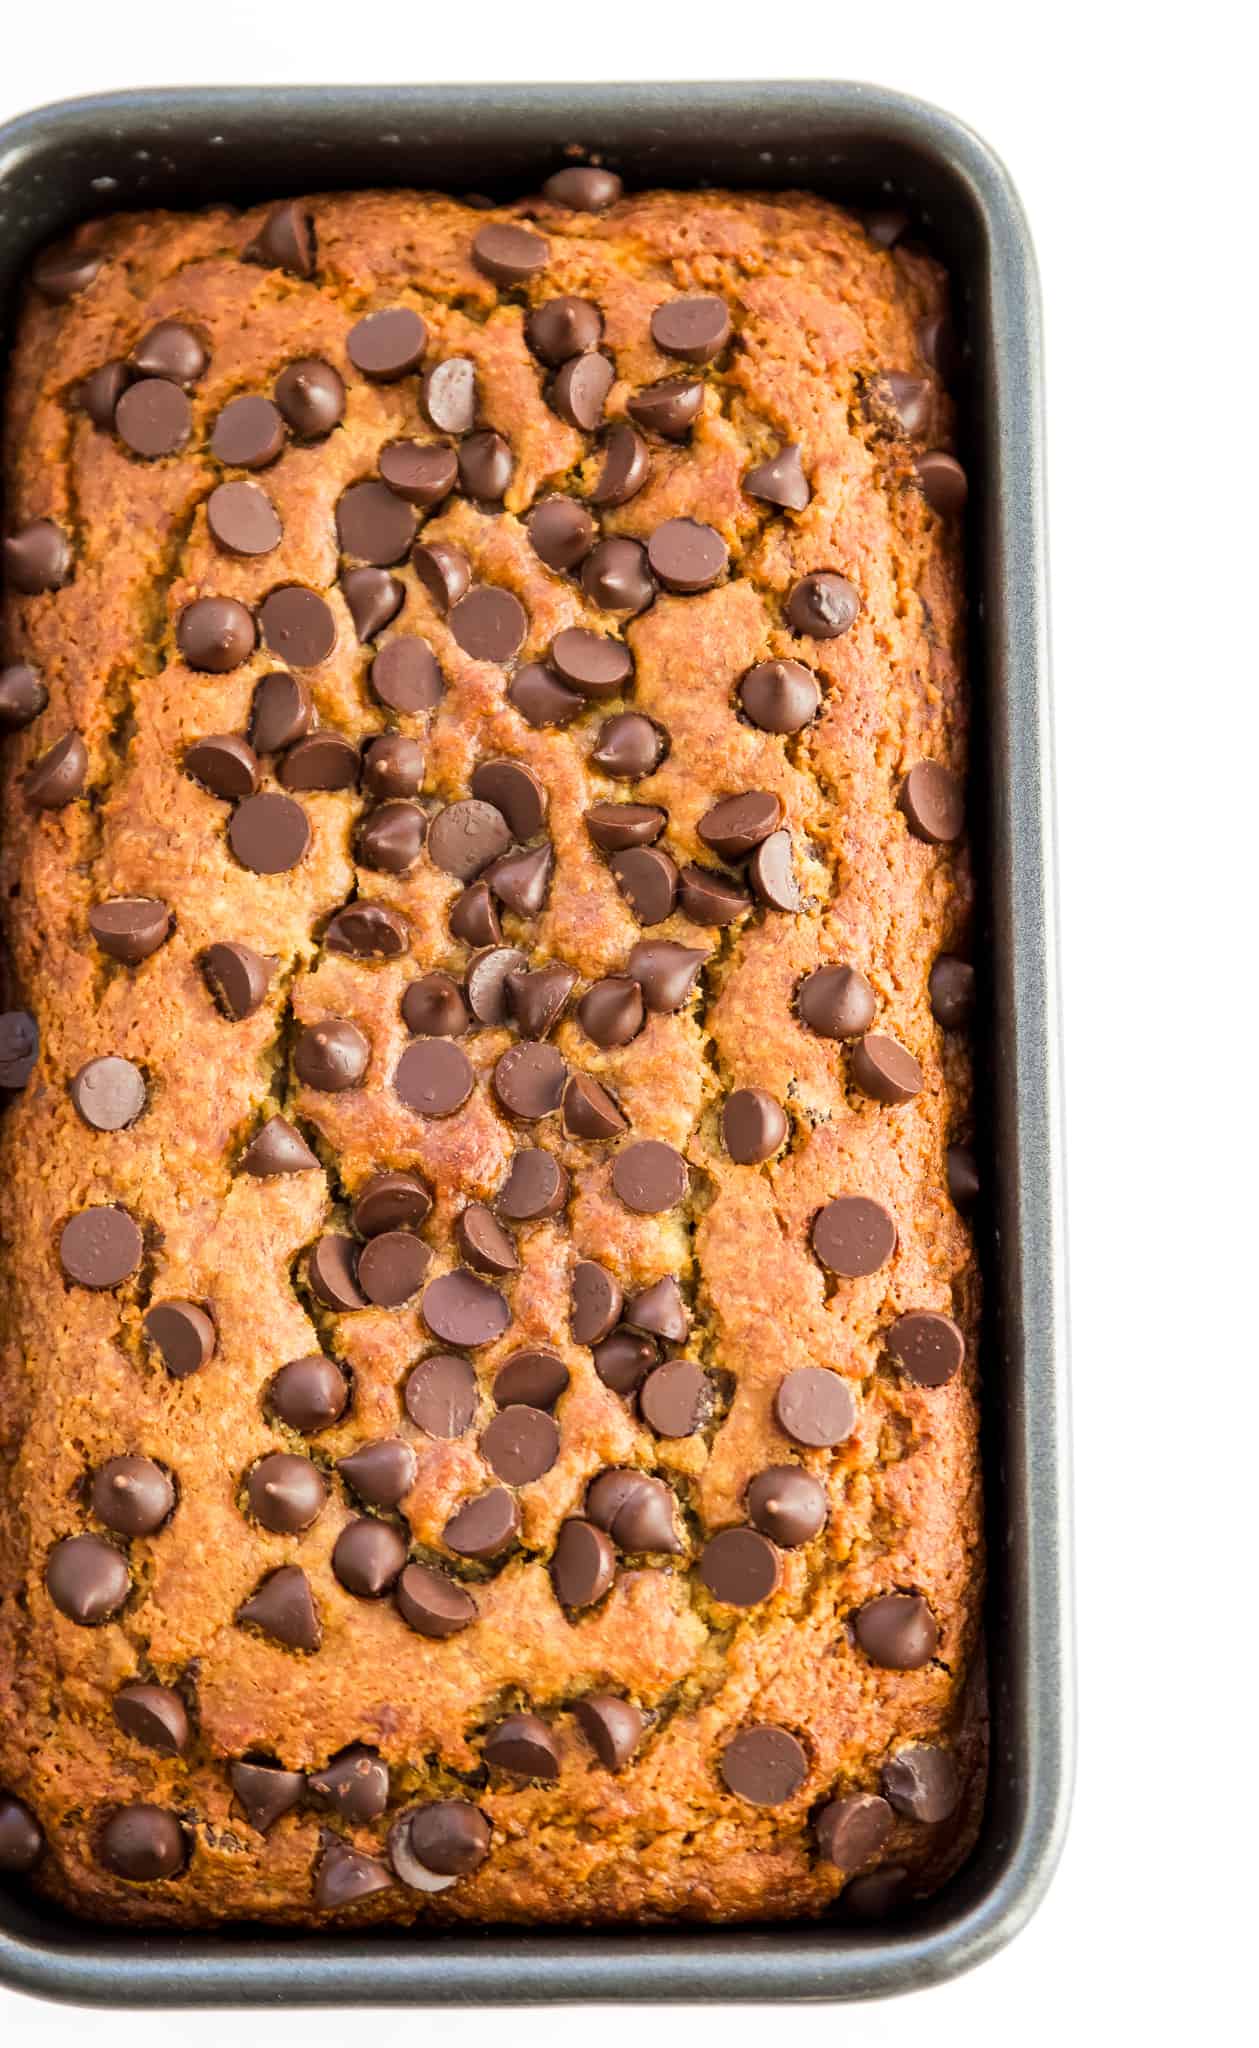 A loaf of gluten free chocolate chip banana bread in a bread pan